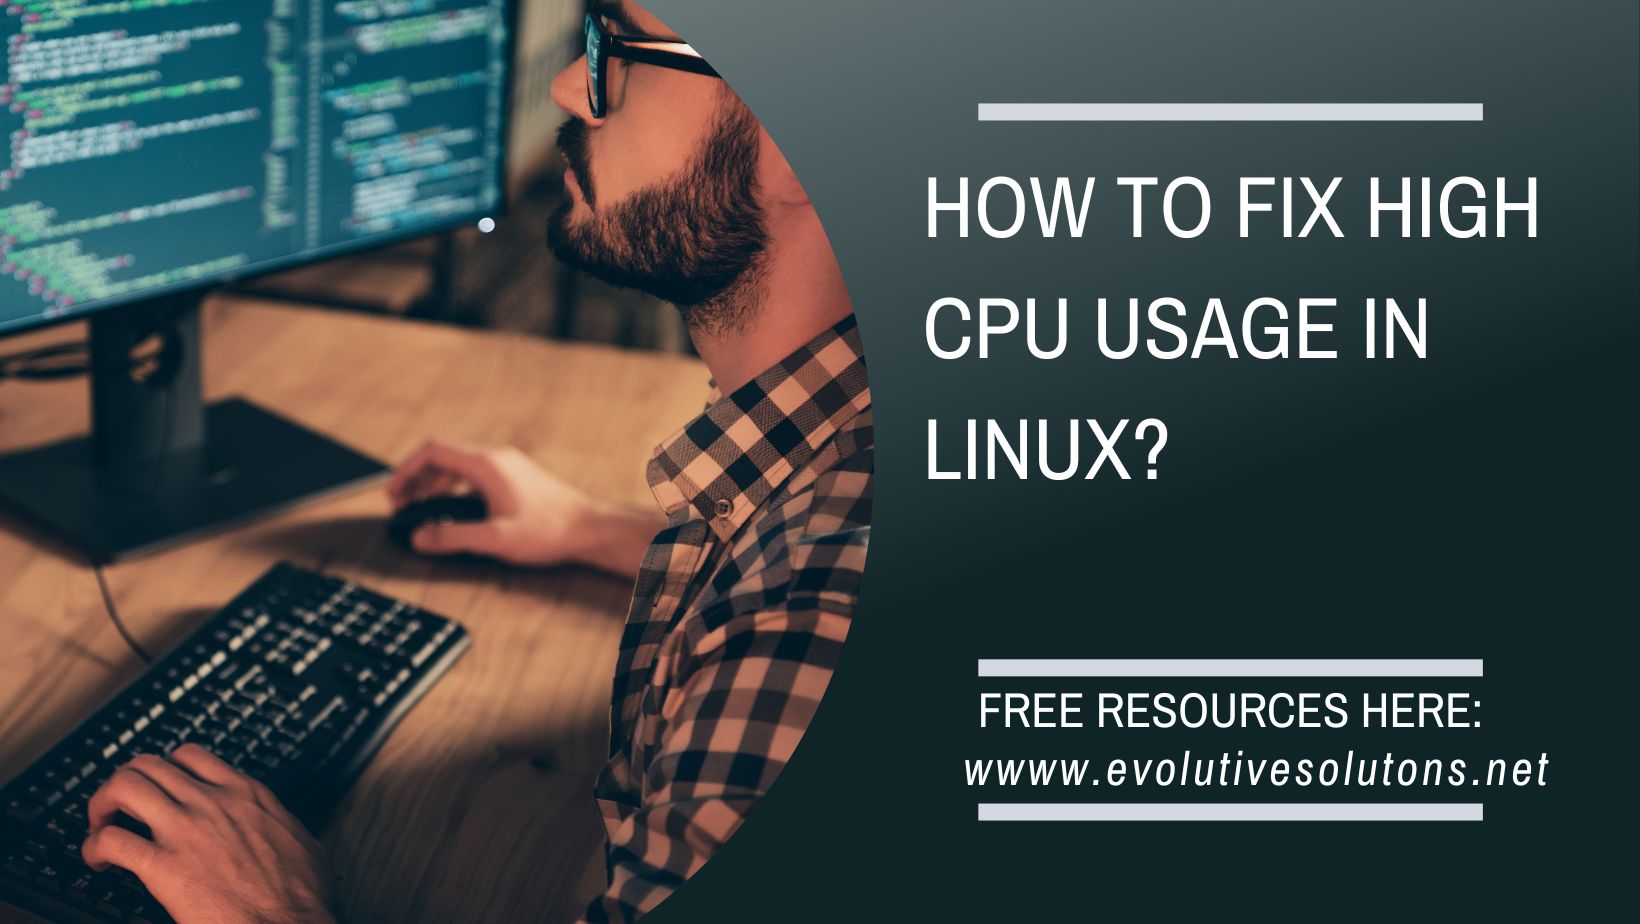 How to Fix High CPU Usage in Linux?